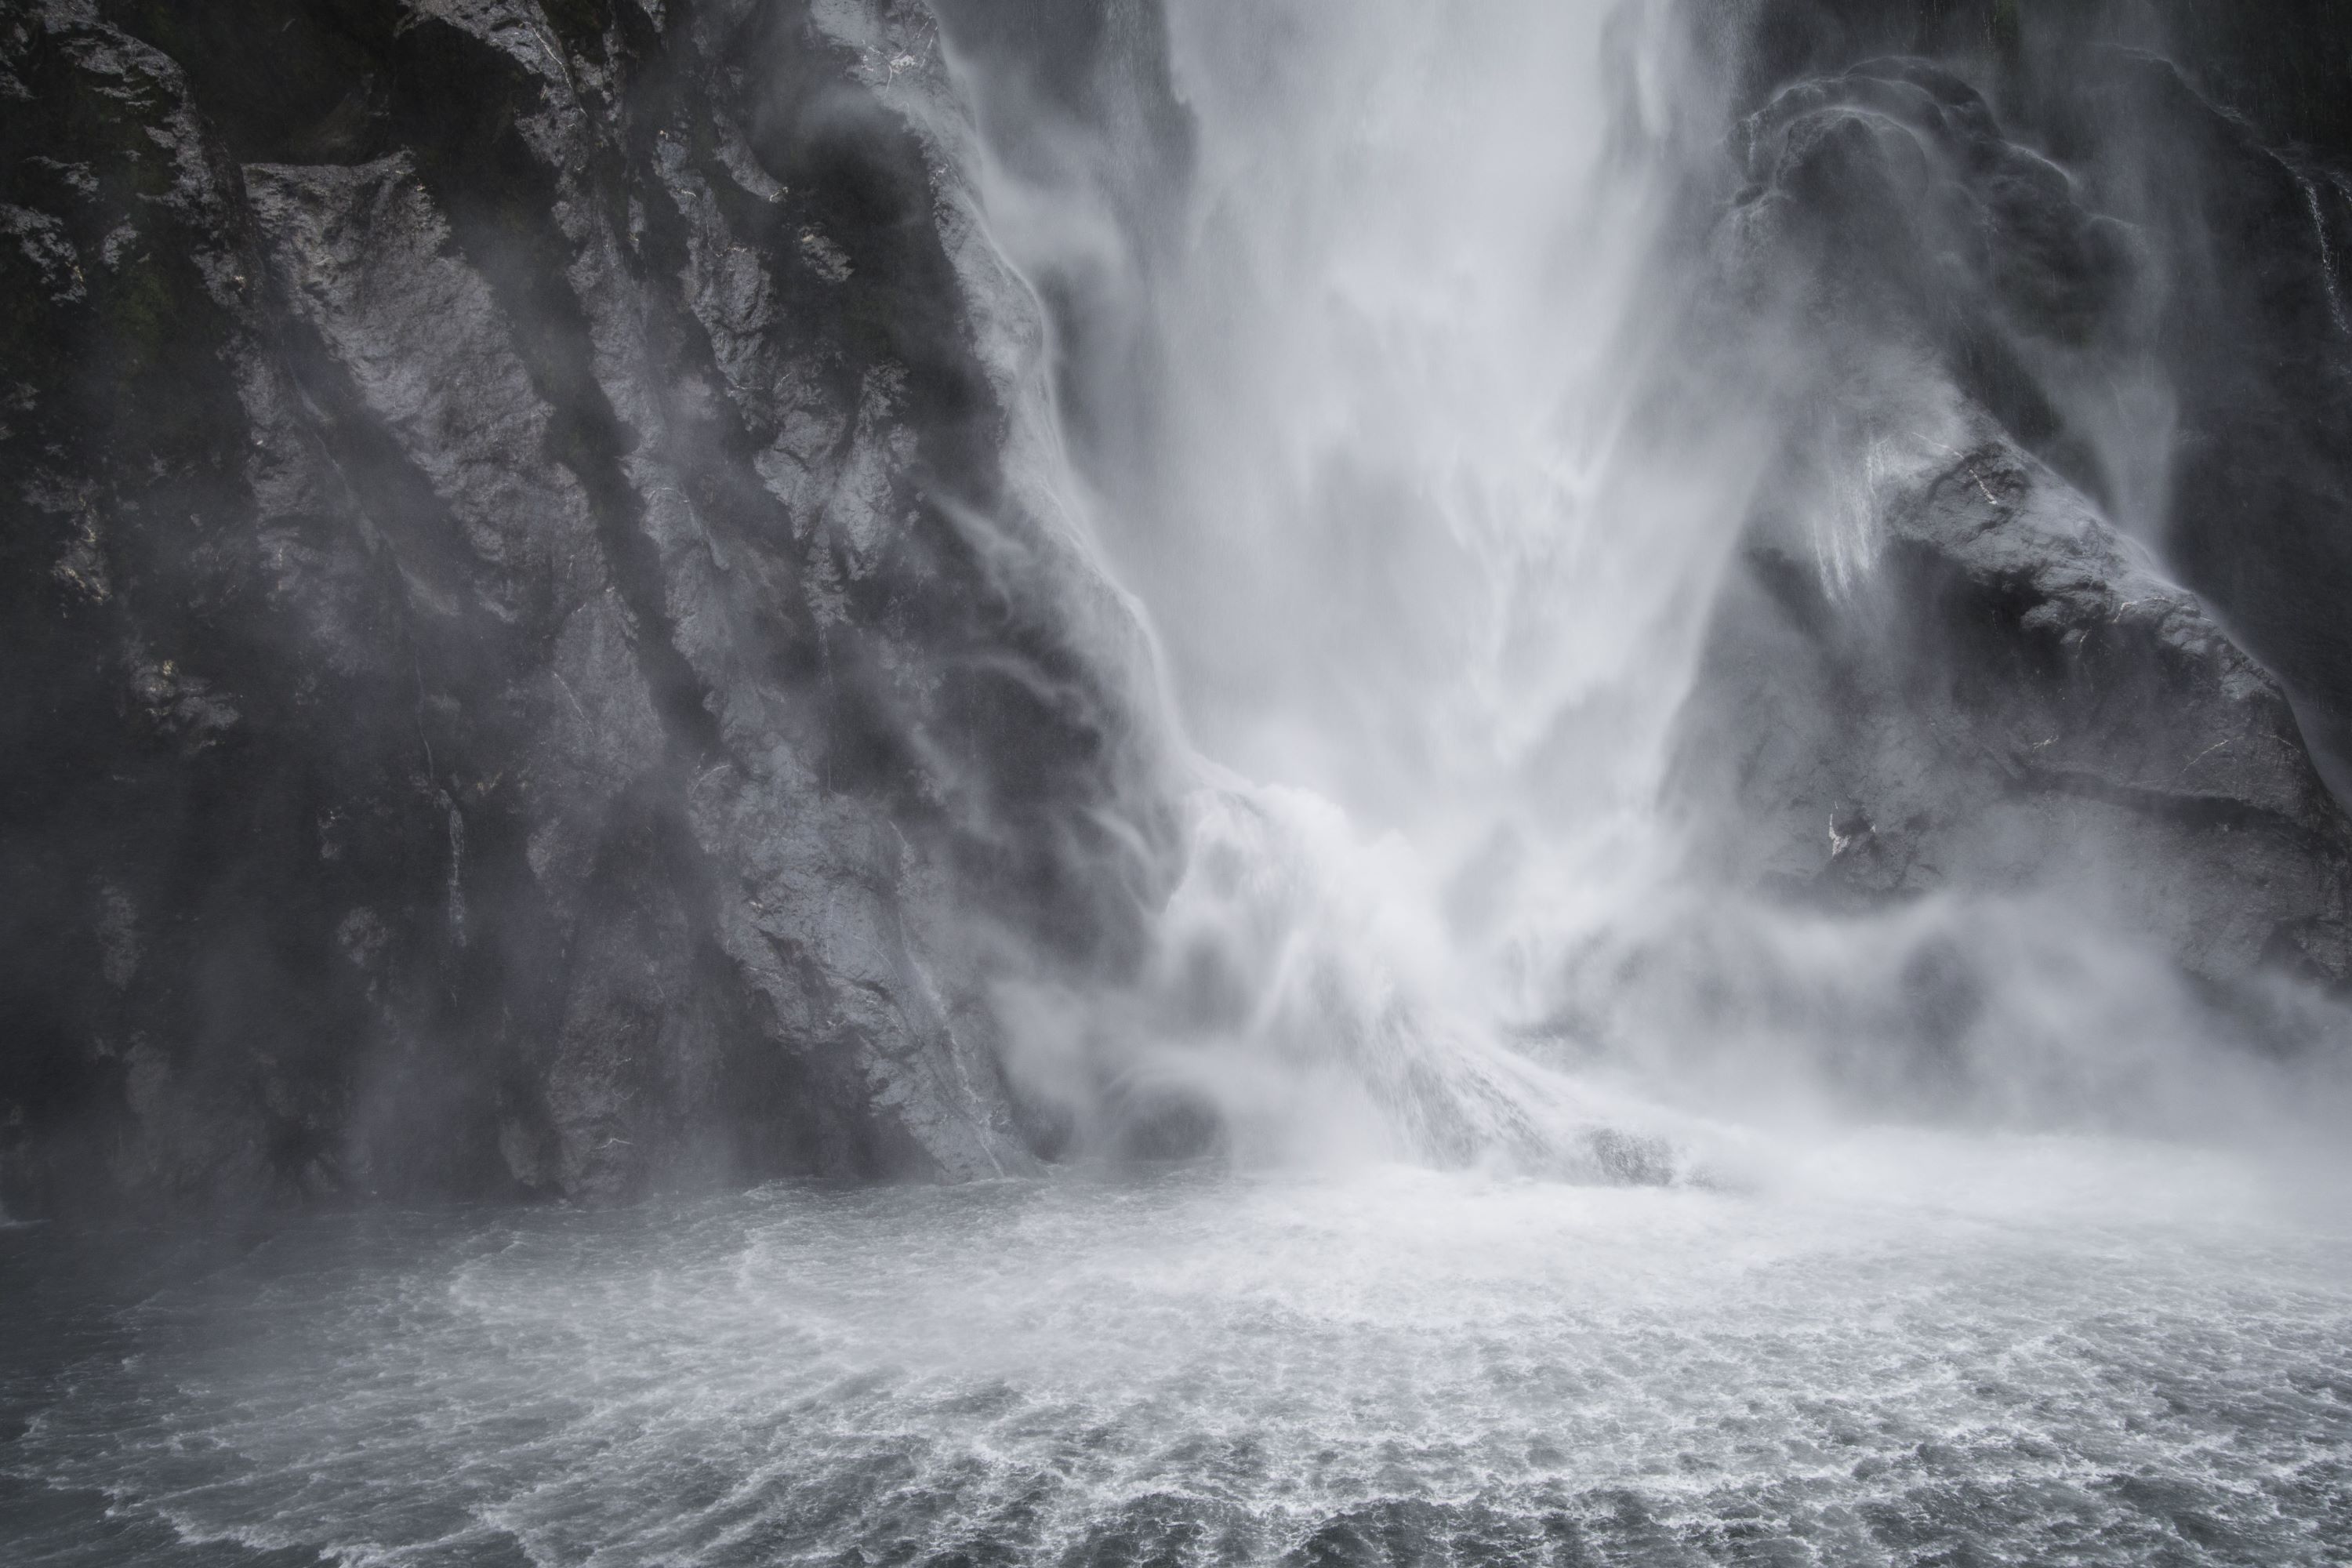 A dramatic waterfall causes spirals in the water at Milford Sound